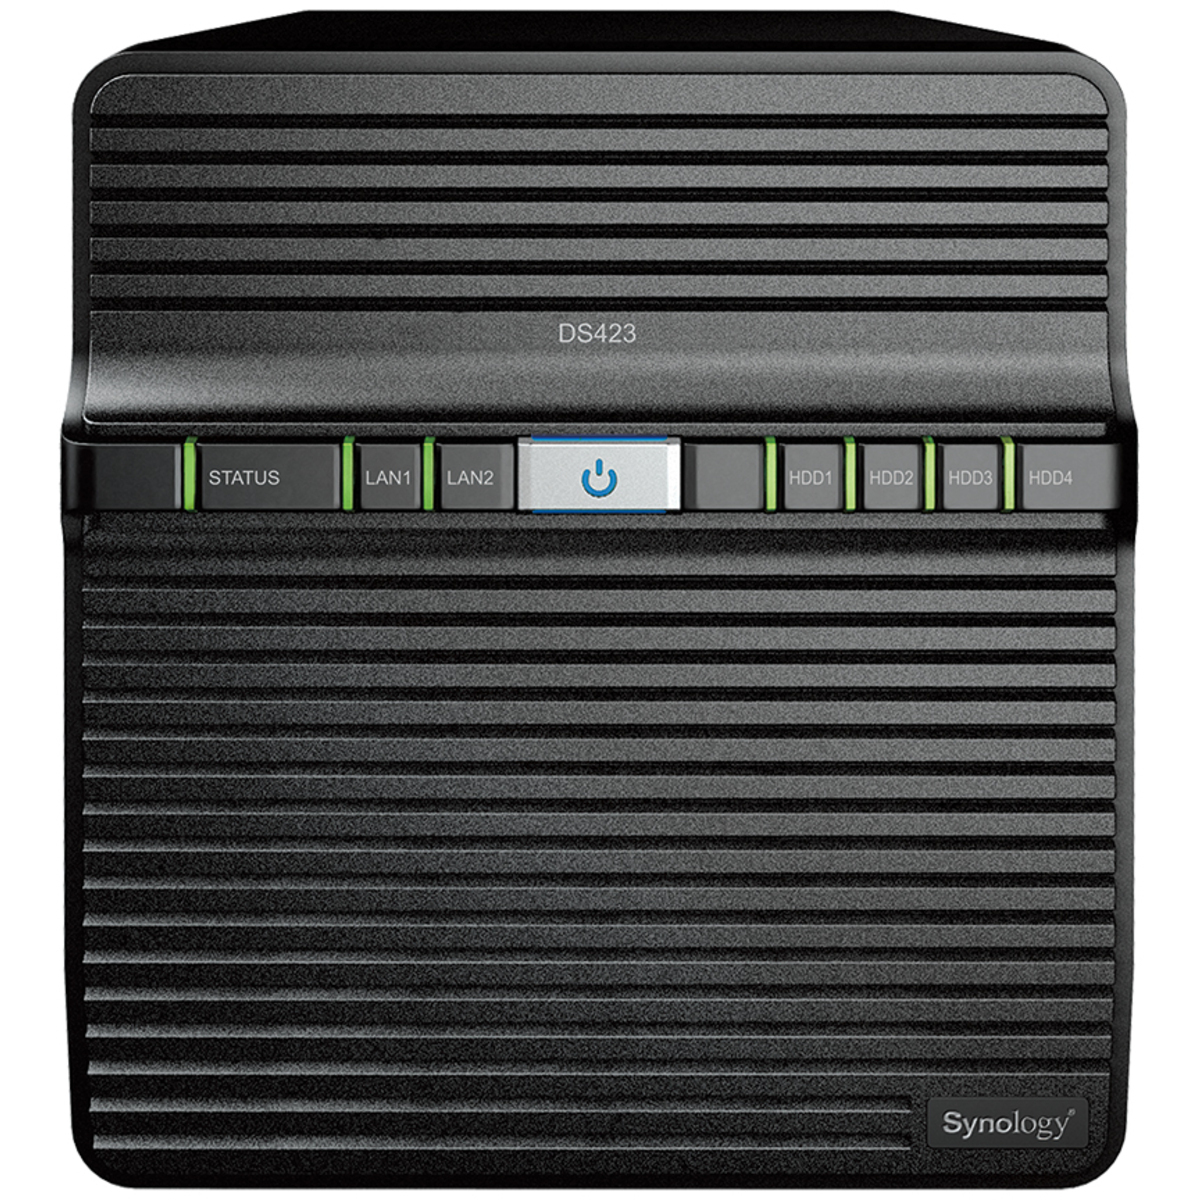 Synology DiskStation DS423 44tb 4-Bay Desktop Personal / Basic Home / Small Office NAS - Network Attached Storage Device 2x22tb Western Digital Ultrastar HC580 SED WUH722422ALE6L1 3.5 7200rpm SATA 6Gb/s HDD ENTERPRISE Class Drives Installed - Burn-In Tested DiskStation DS423